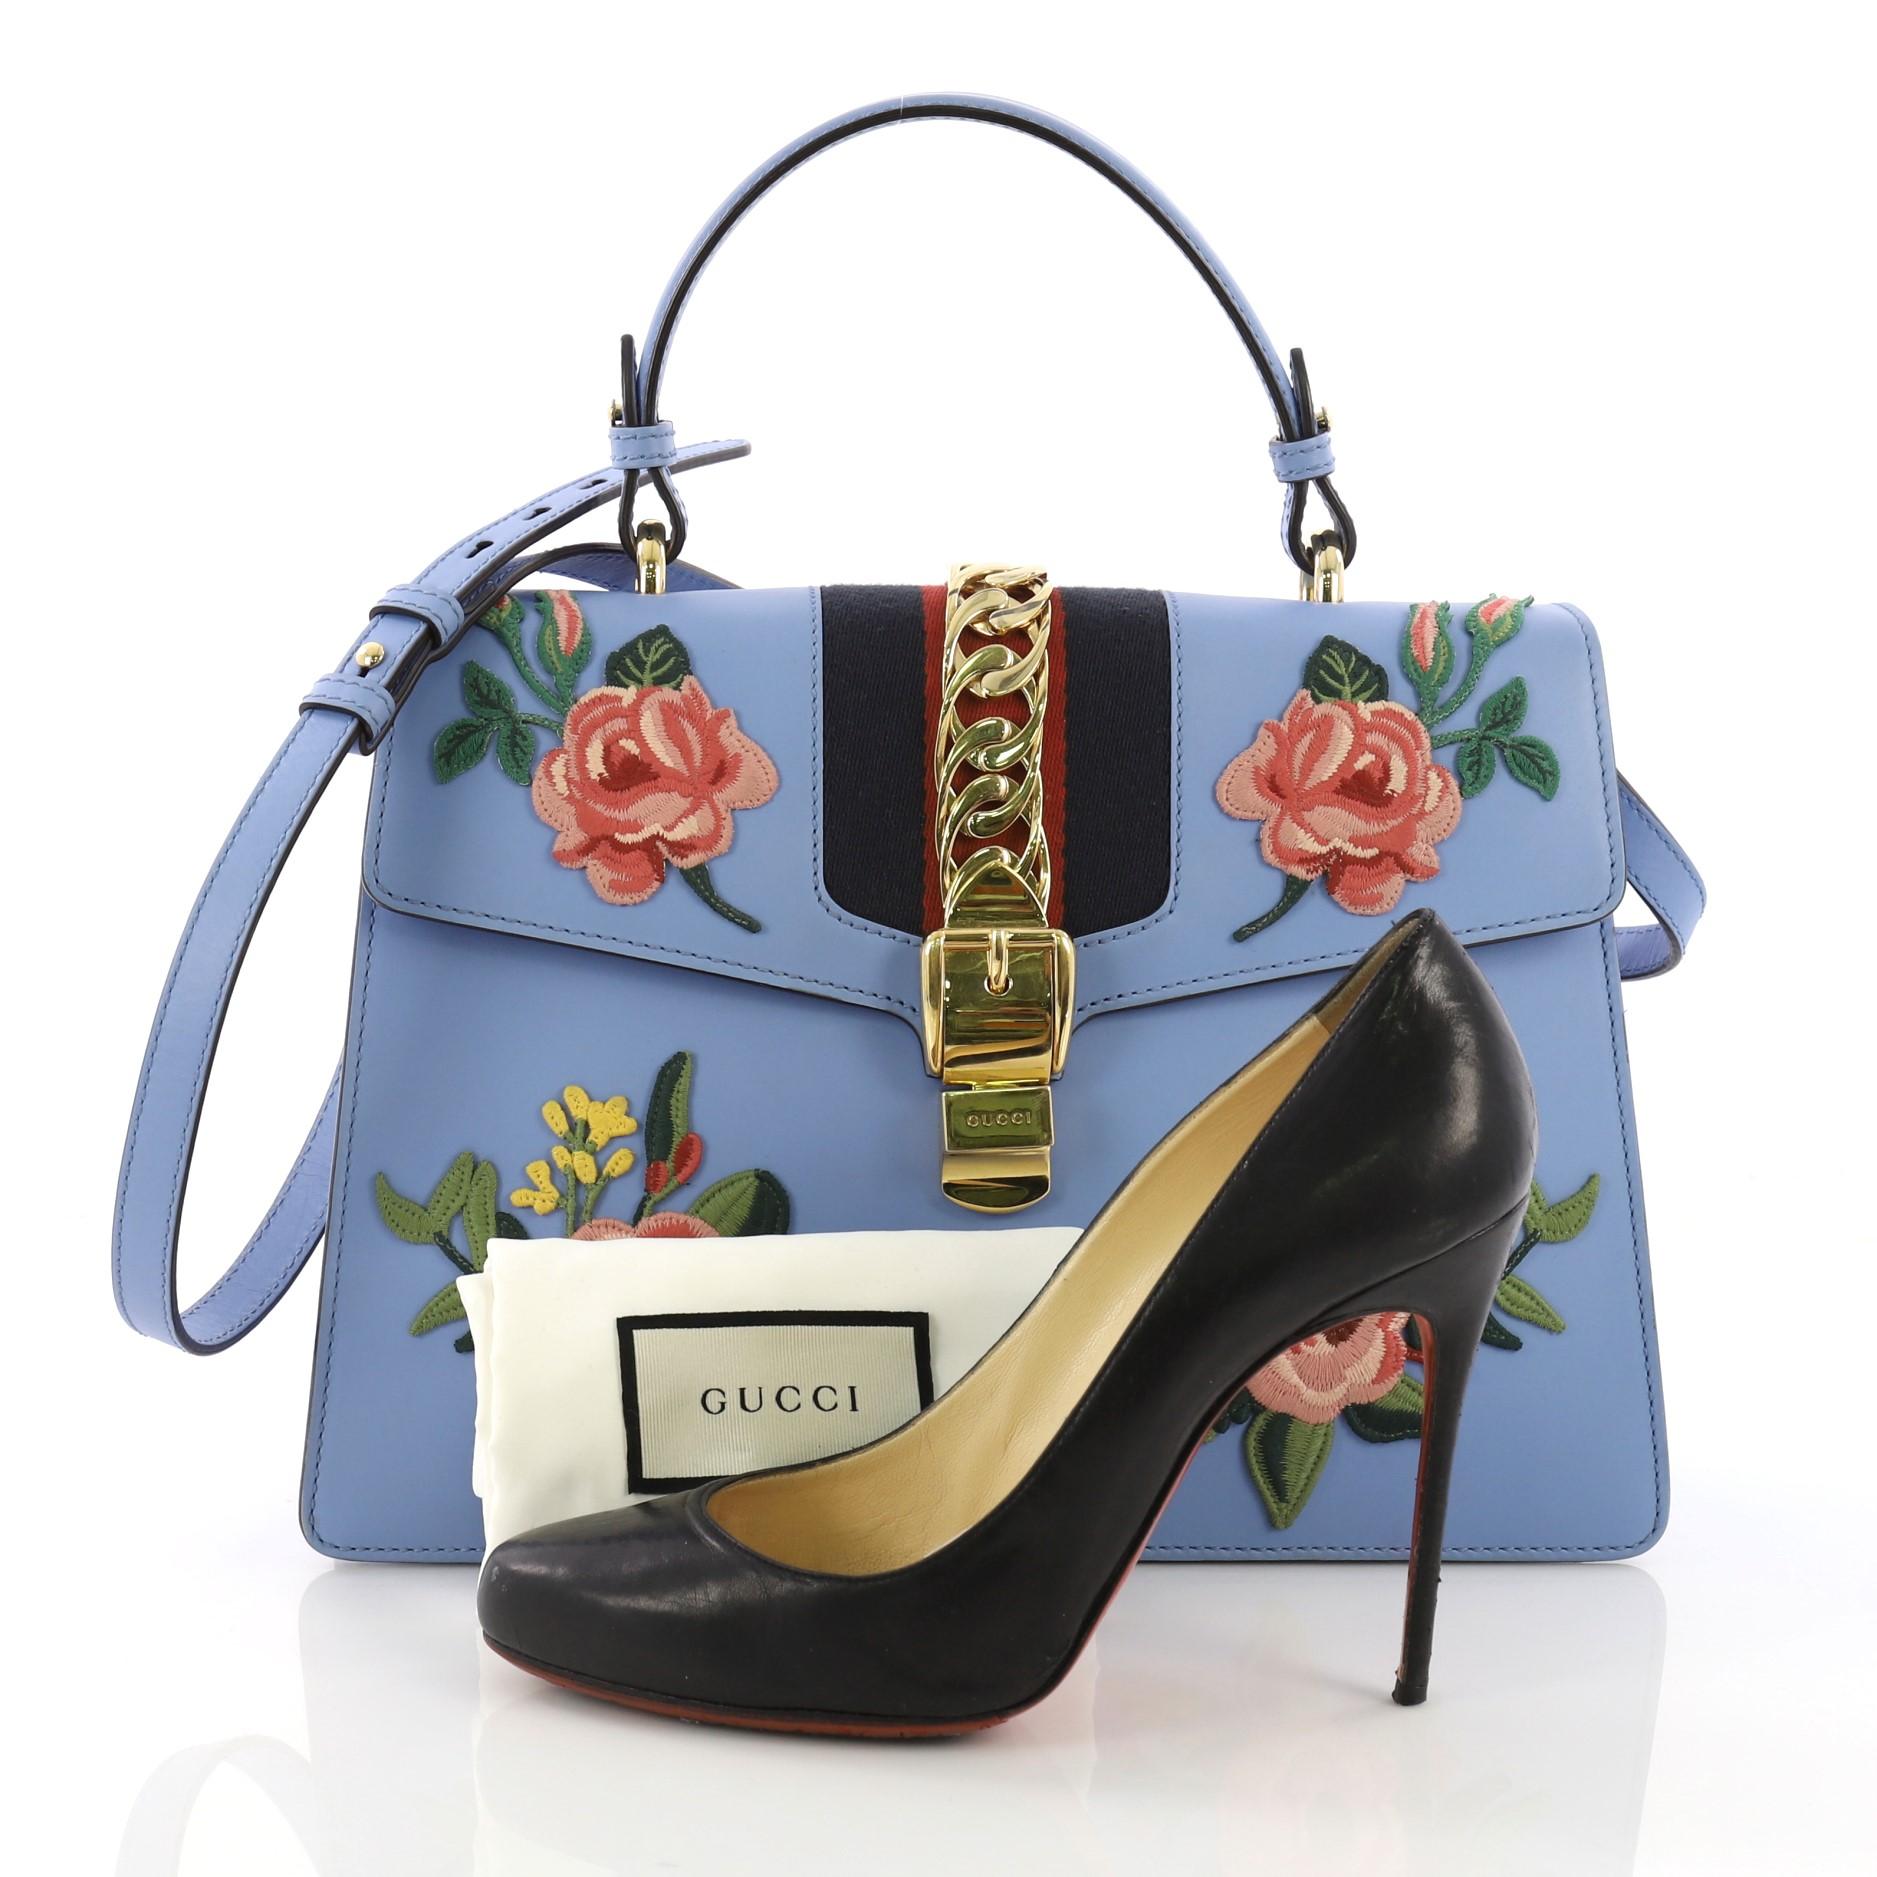 This Gucci Sylvie Top Handle Bag Embroidered Leather Medium, crafted in blue embroidered leather, features a leather shoulder strap, nylon web detail with curb chain, embroidered flower appliques, and gold-tone hardware. Its buckle closure opens to